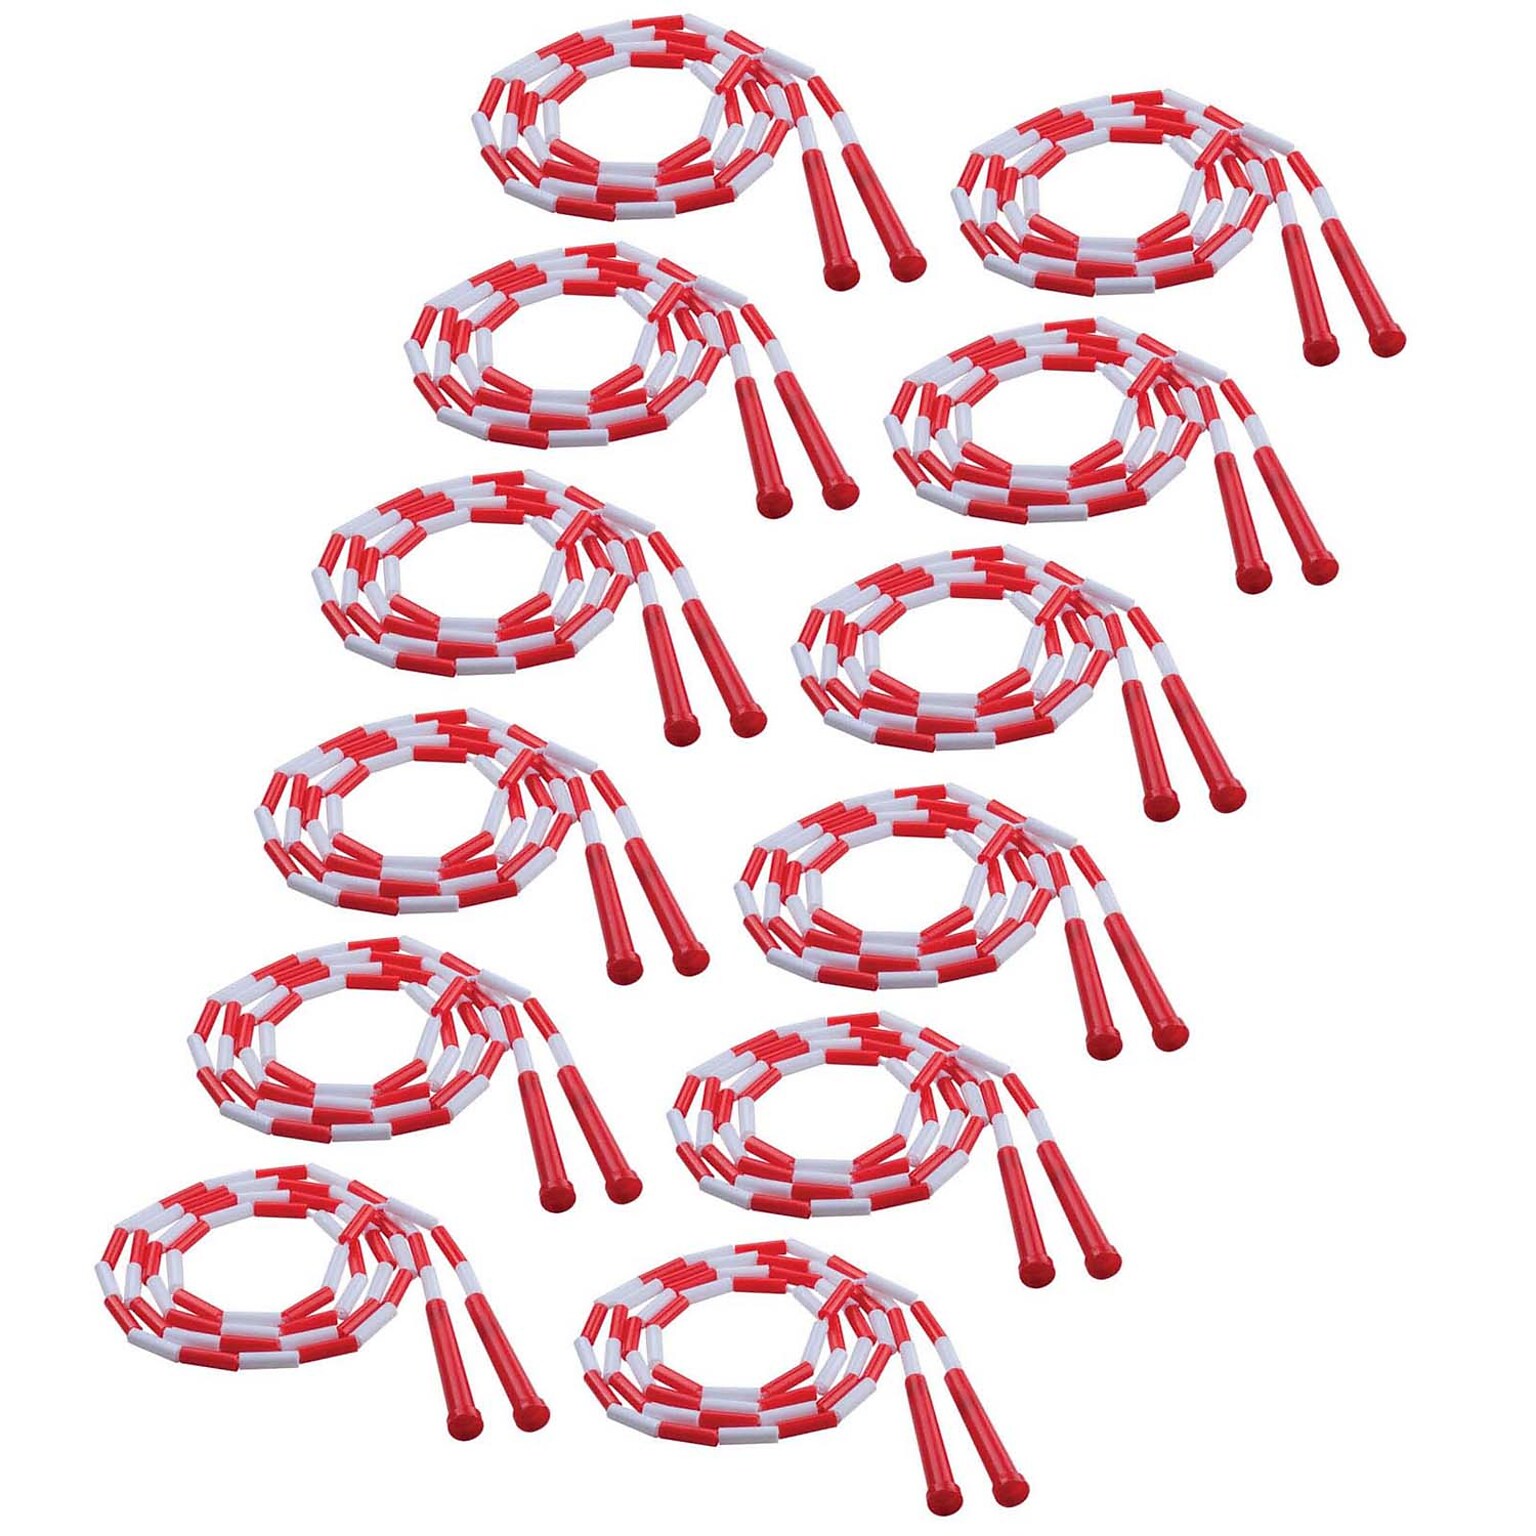 Champion Sports Plastic Segmented Jump Rope 7, Red & White, Pack of 12 (CHSPR7-12)